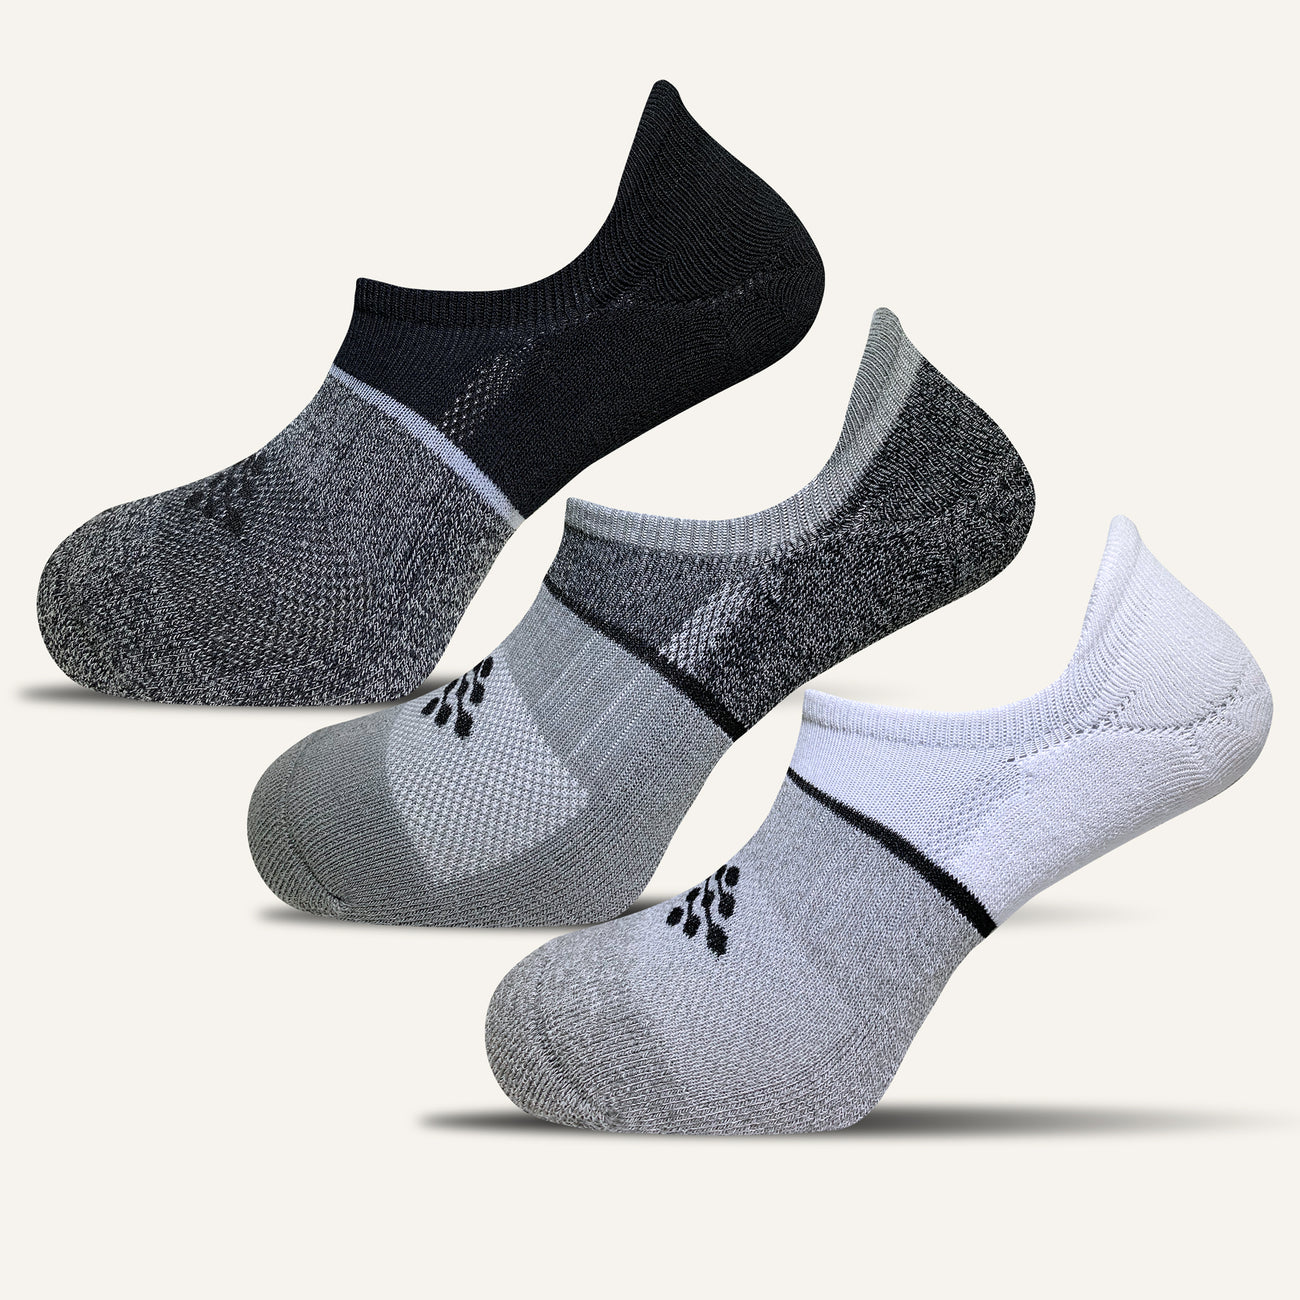 No Nonsense Soft and Breathable No Show Women's Socks, 3 ct - Harris Teeter